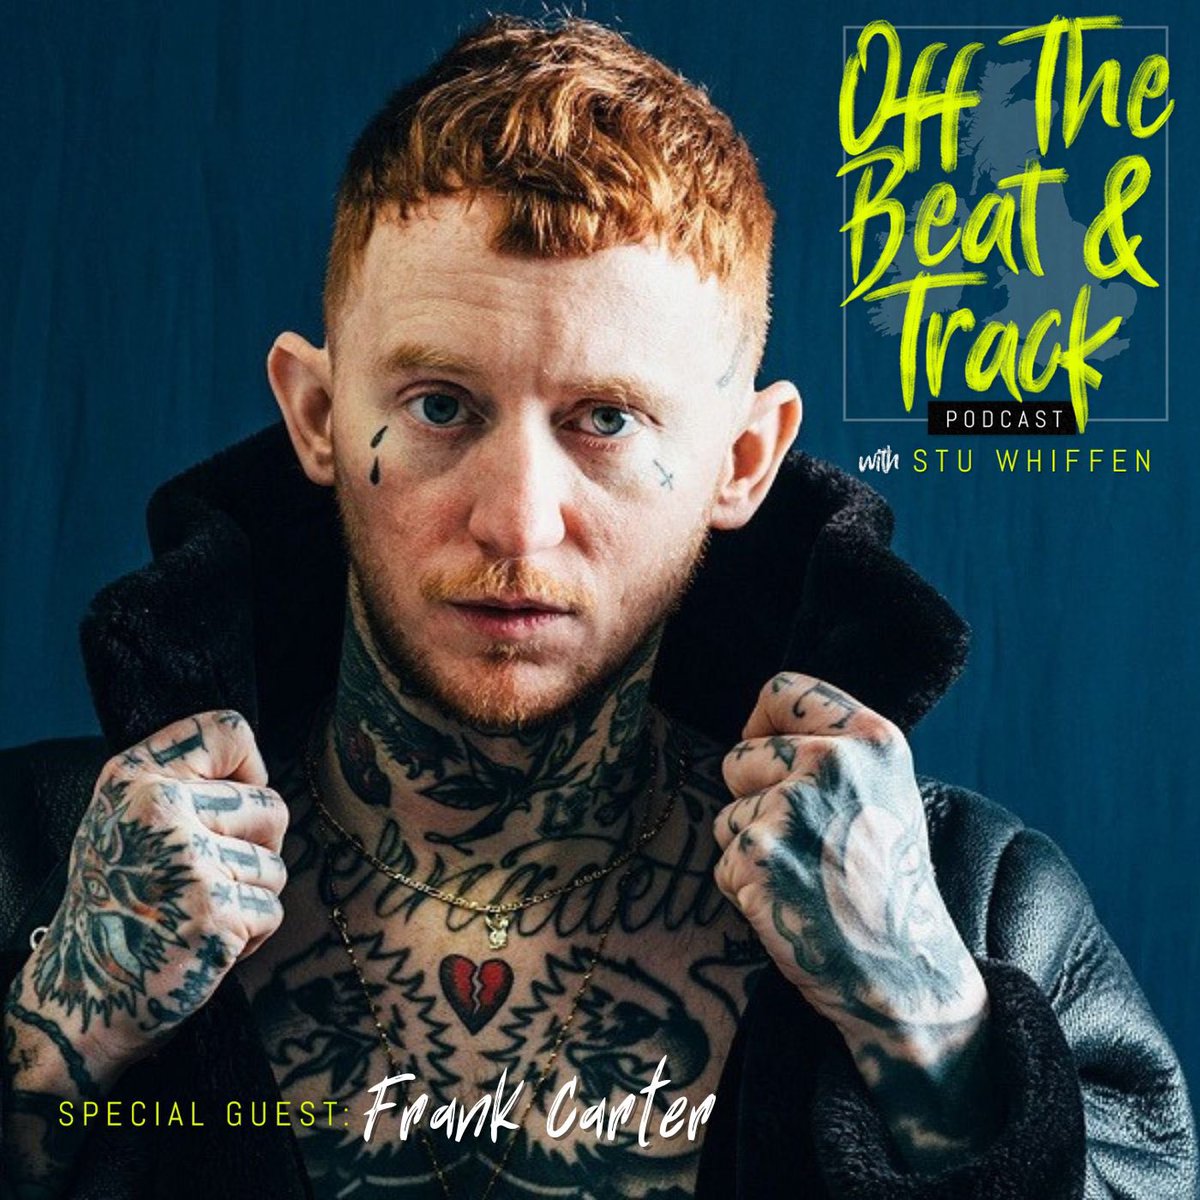 NEW @beatandtrackpod EPISODE It was really lovely having a great natter about tunes and life with @frankcarter23 of @therattlesnakes Listen open.spotify.com/episode/654pWi… #frankcarter #frankcarterandtherattlesnakes #musicpodcast